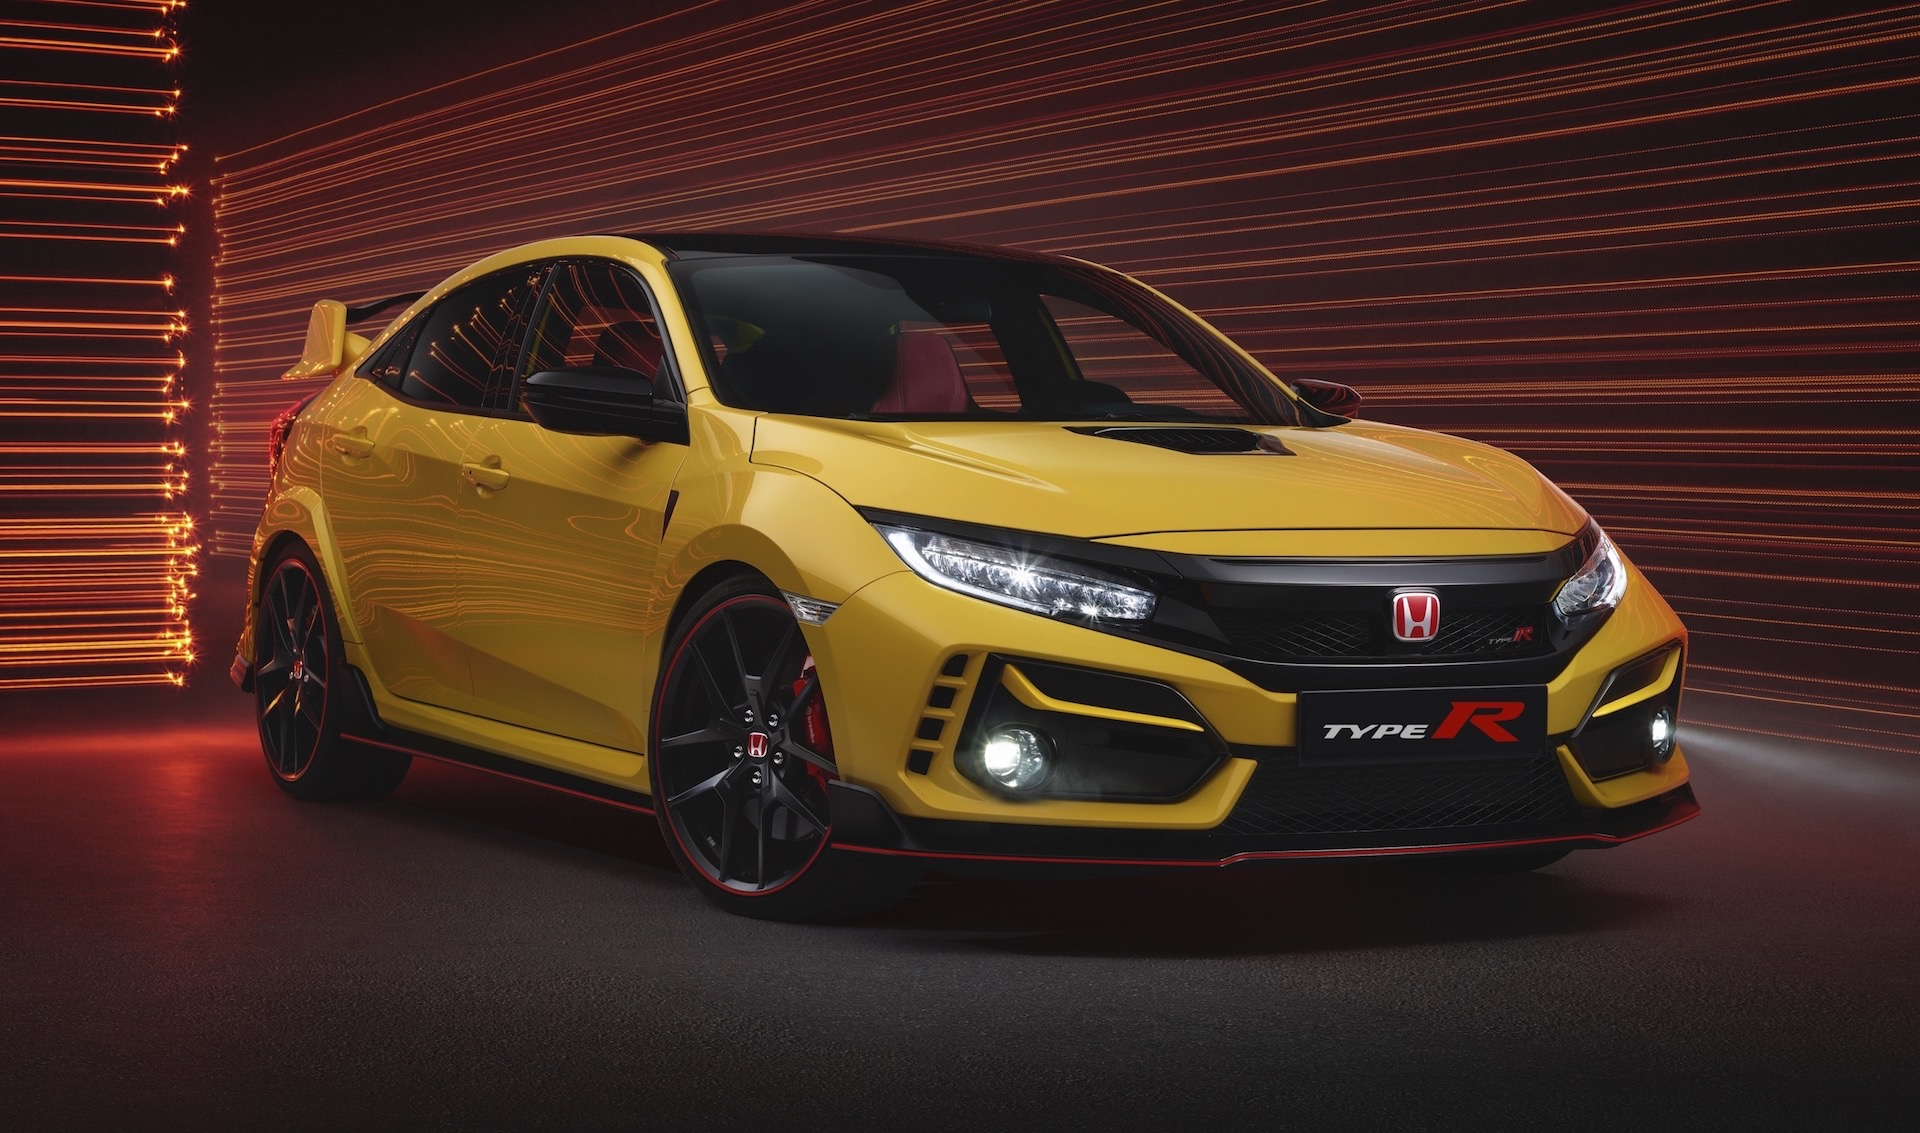 2021 Honda Civic Type R Limited Edition announced for Australia